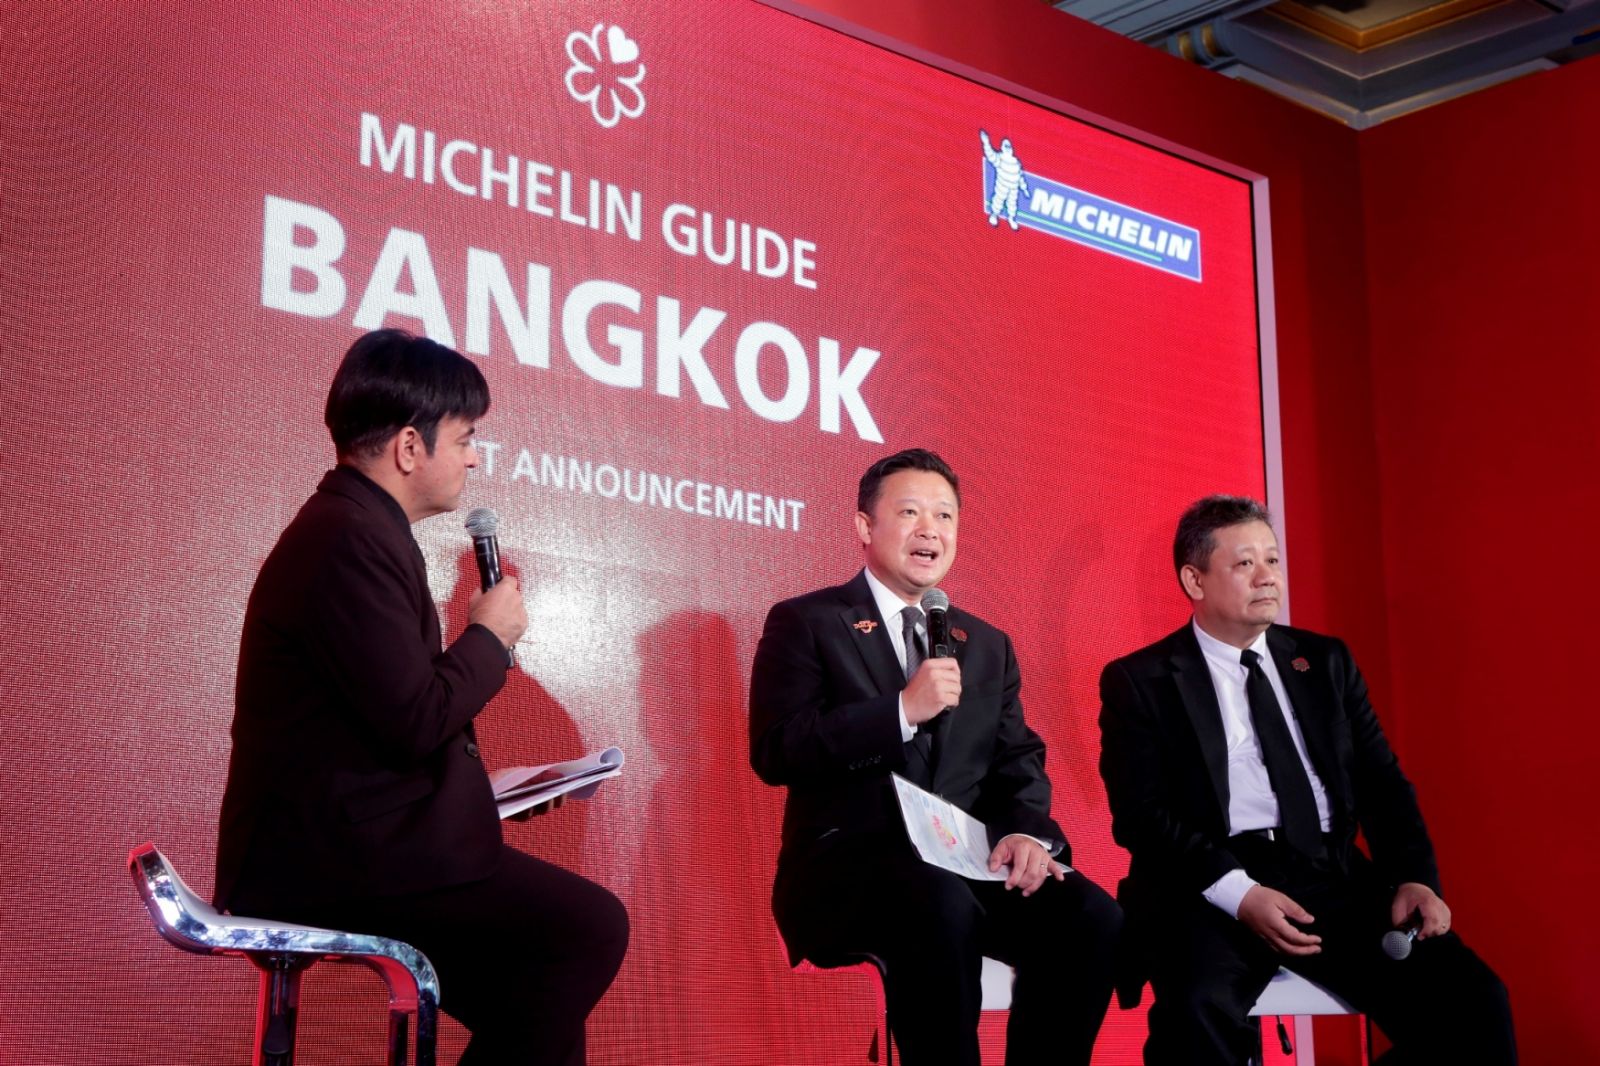 Michelin In Partnership With TAT Will Be Launched The First Michelin Guide Bangkok This Year